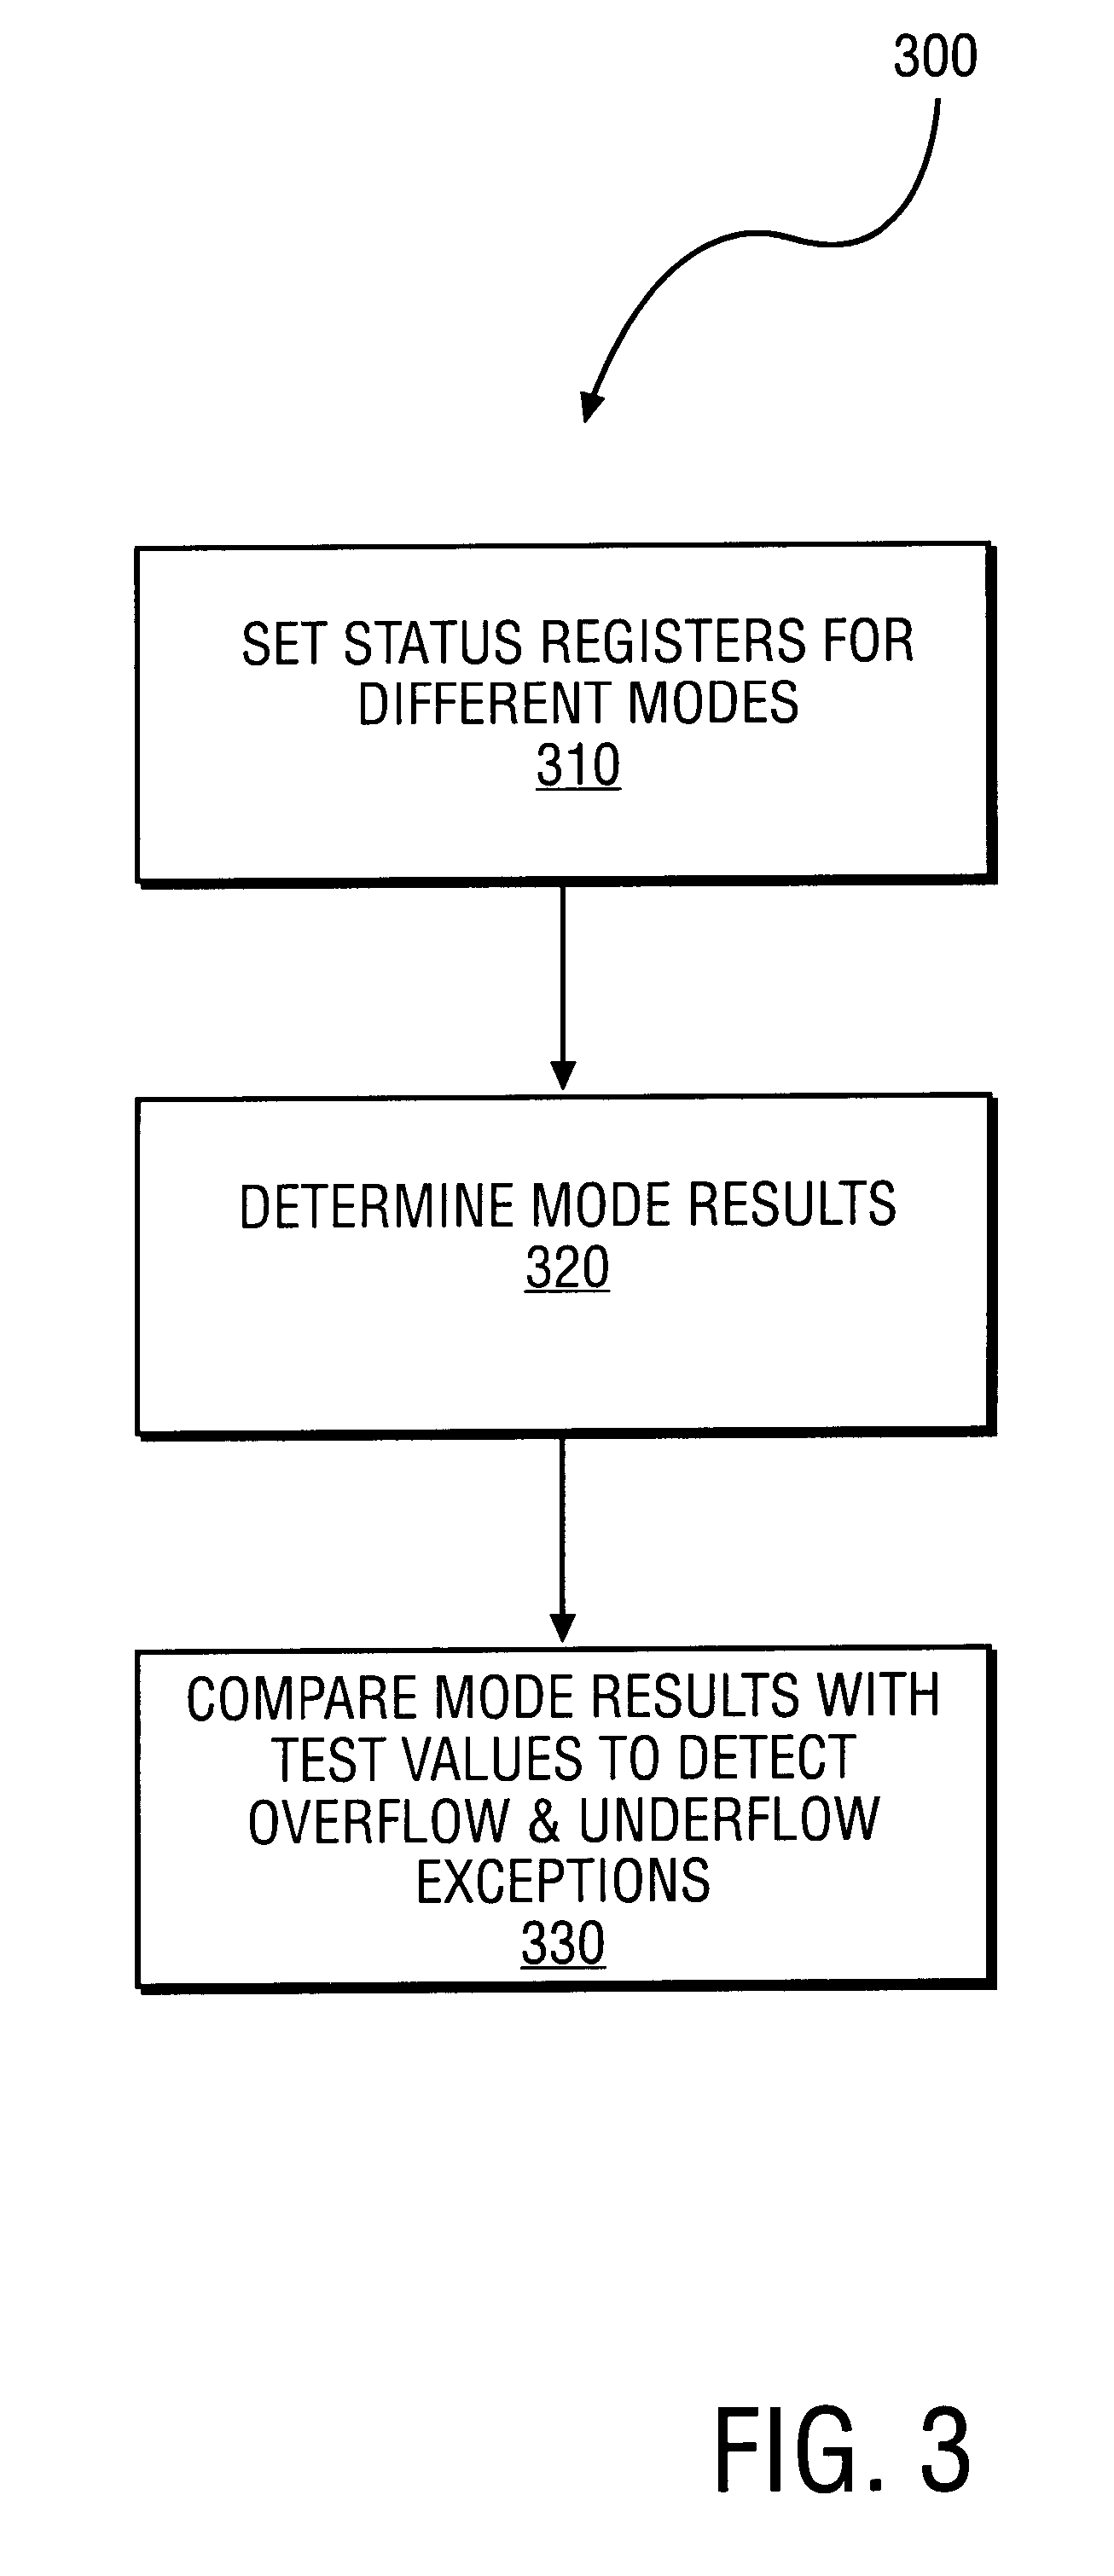 Method to detect IEEE overflow and underflow conditions